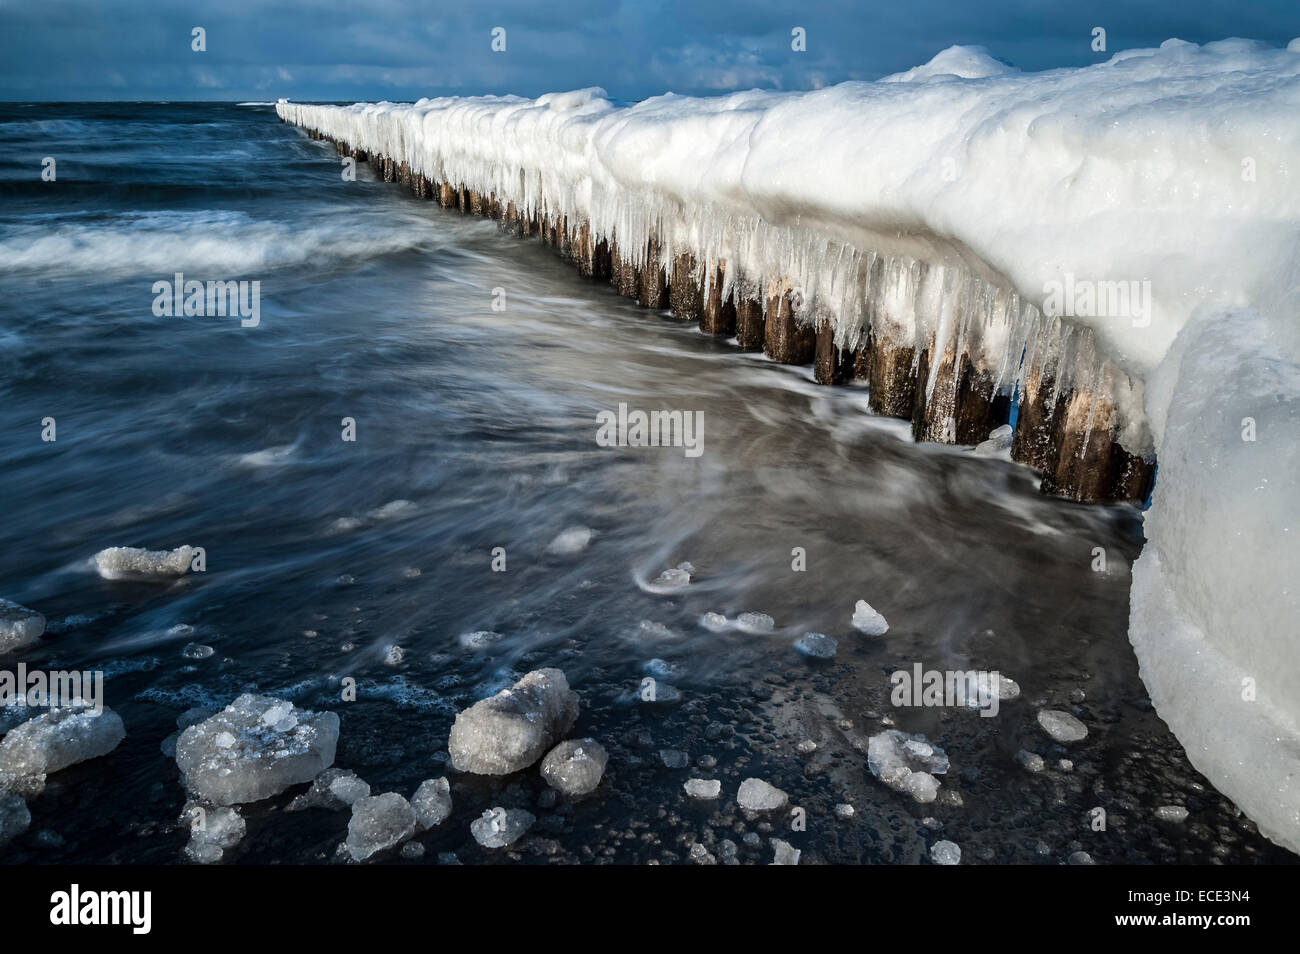 Groynes covered with snow and icicles, Baltic Sea, Zingst, Fischland-Darß-Zingst, Mecklenburg-Western Pomerania, Germany Stock Photo